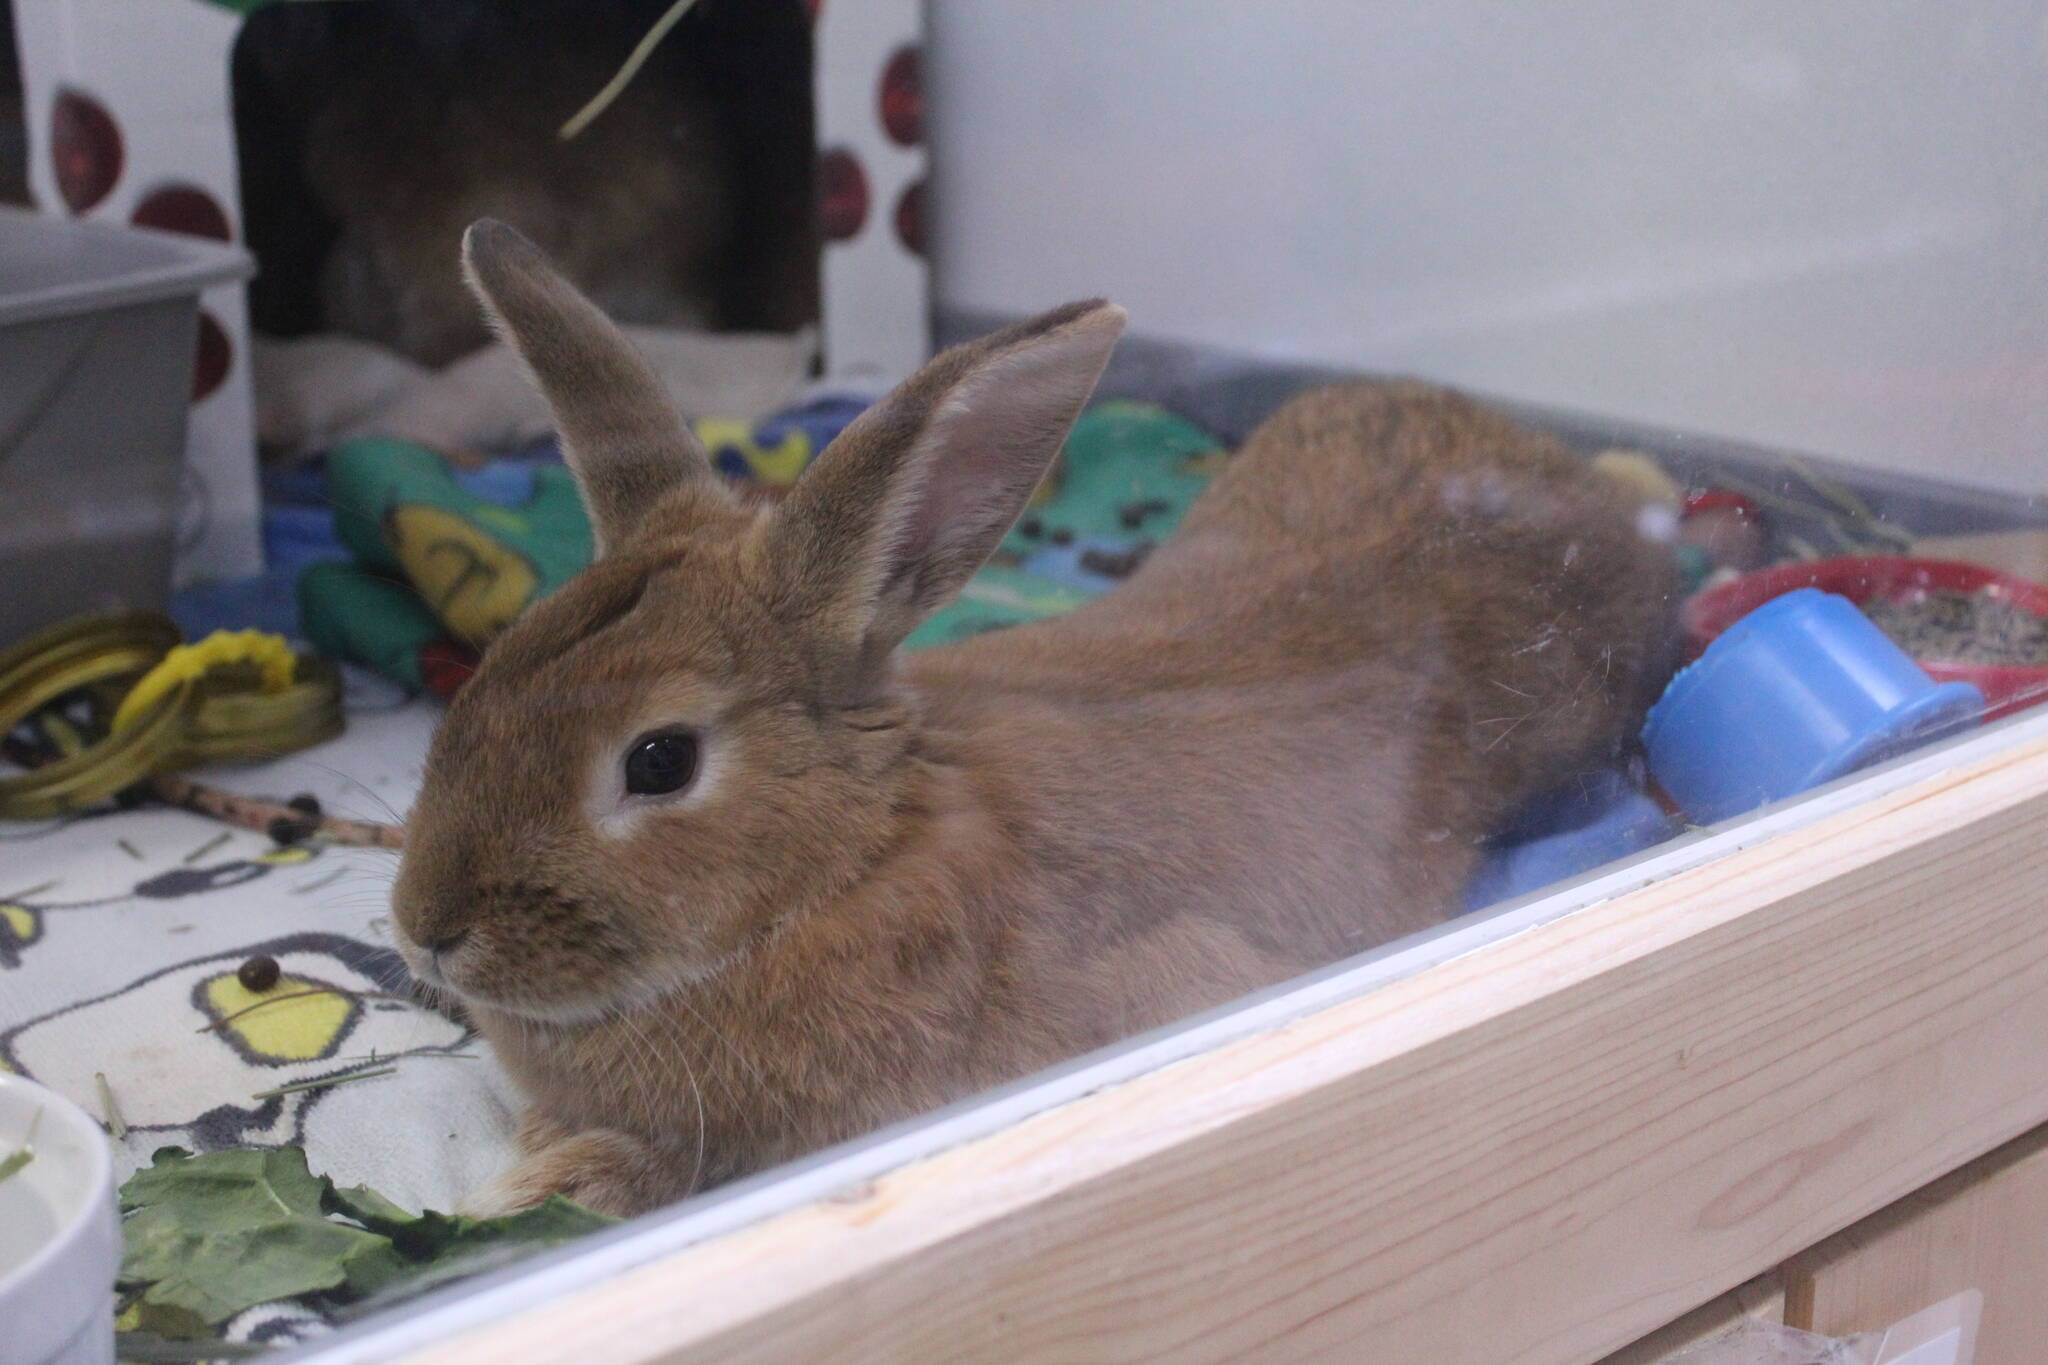 At Reber Ranch, customers and clients can adopt rabbits and cats. Photo by Bailey Jo Josie/Sound Publishing.